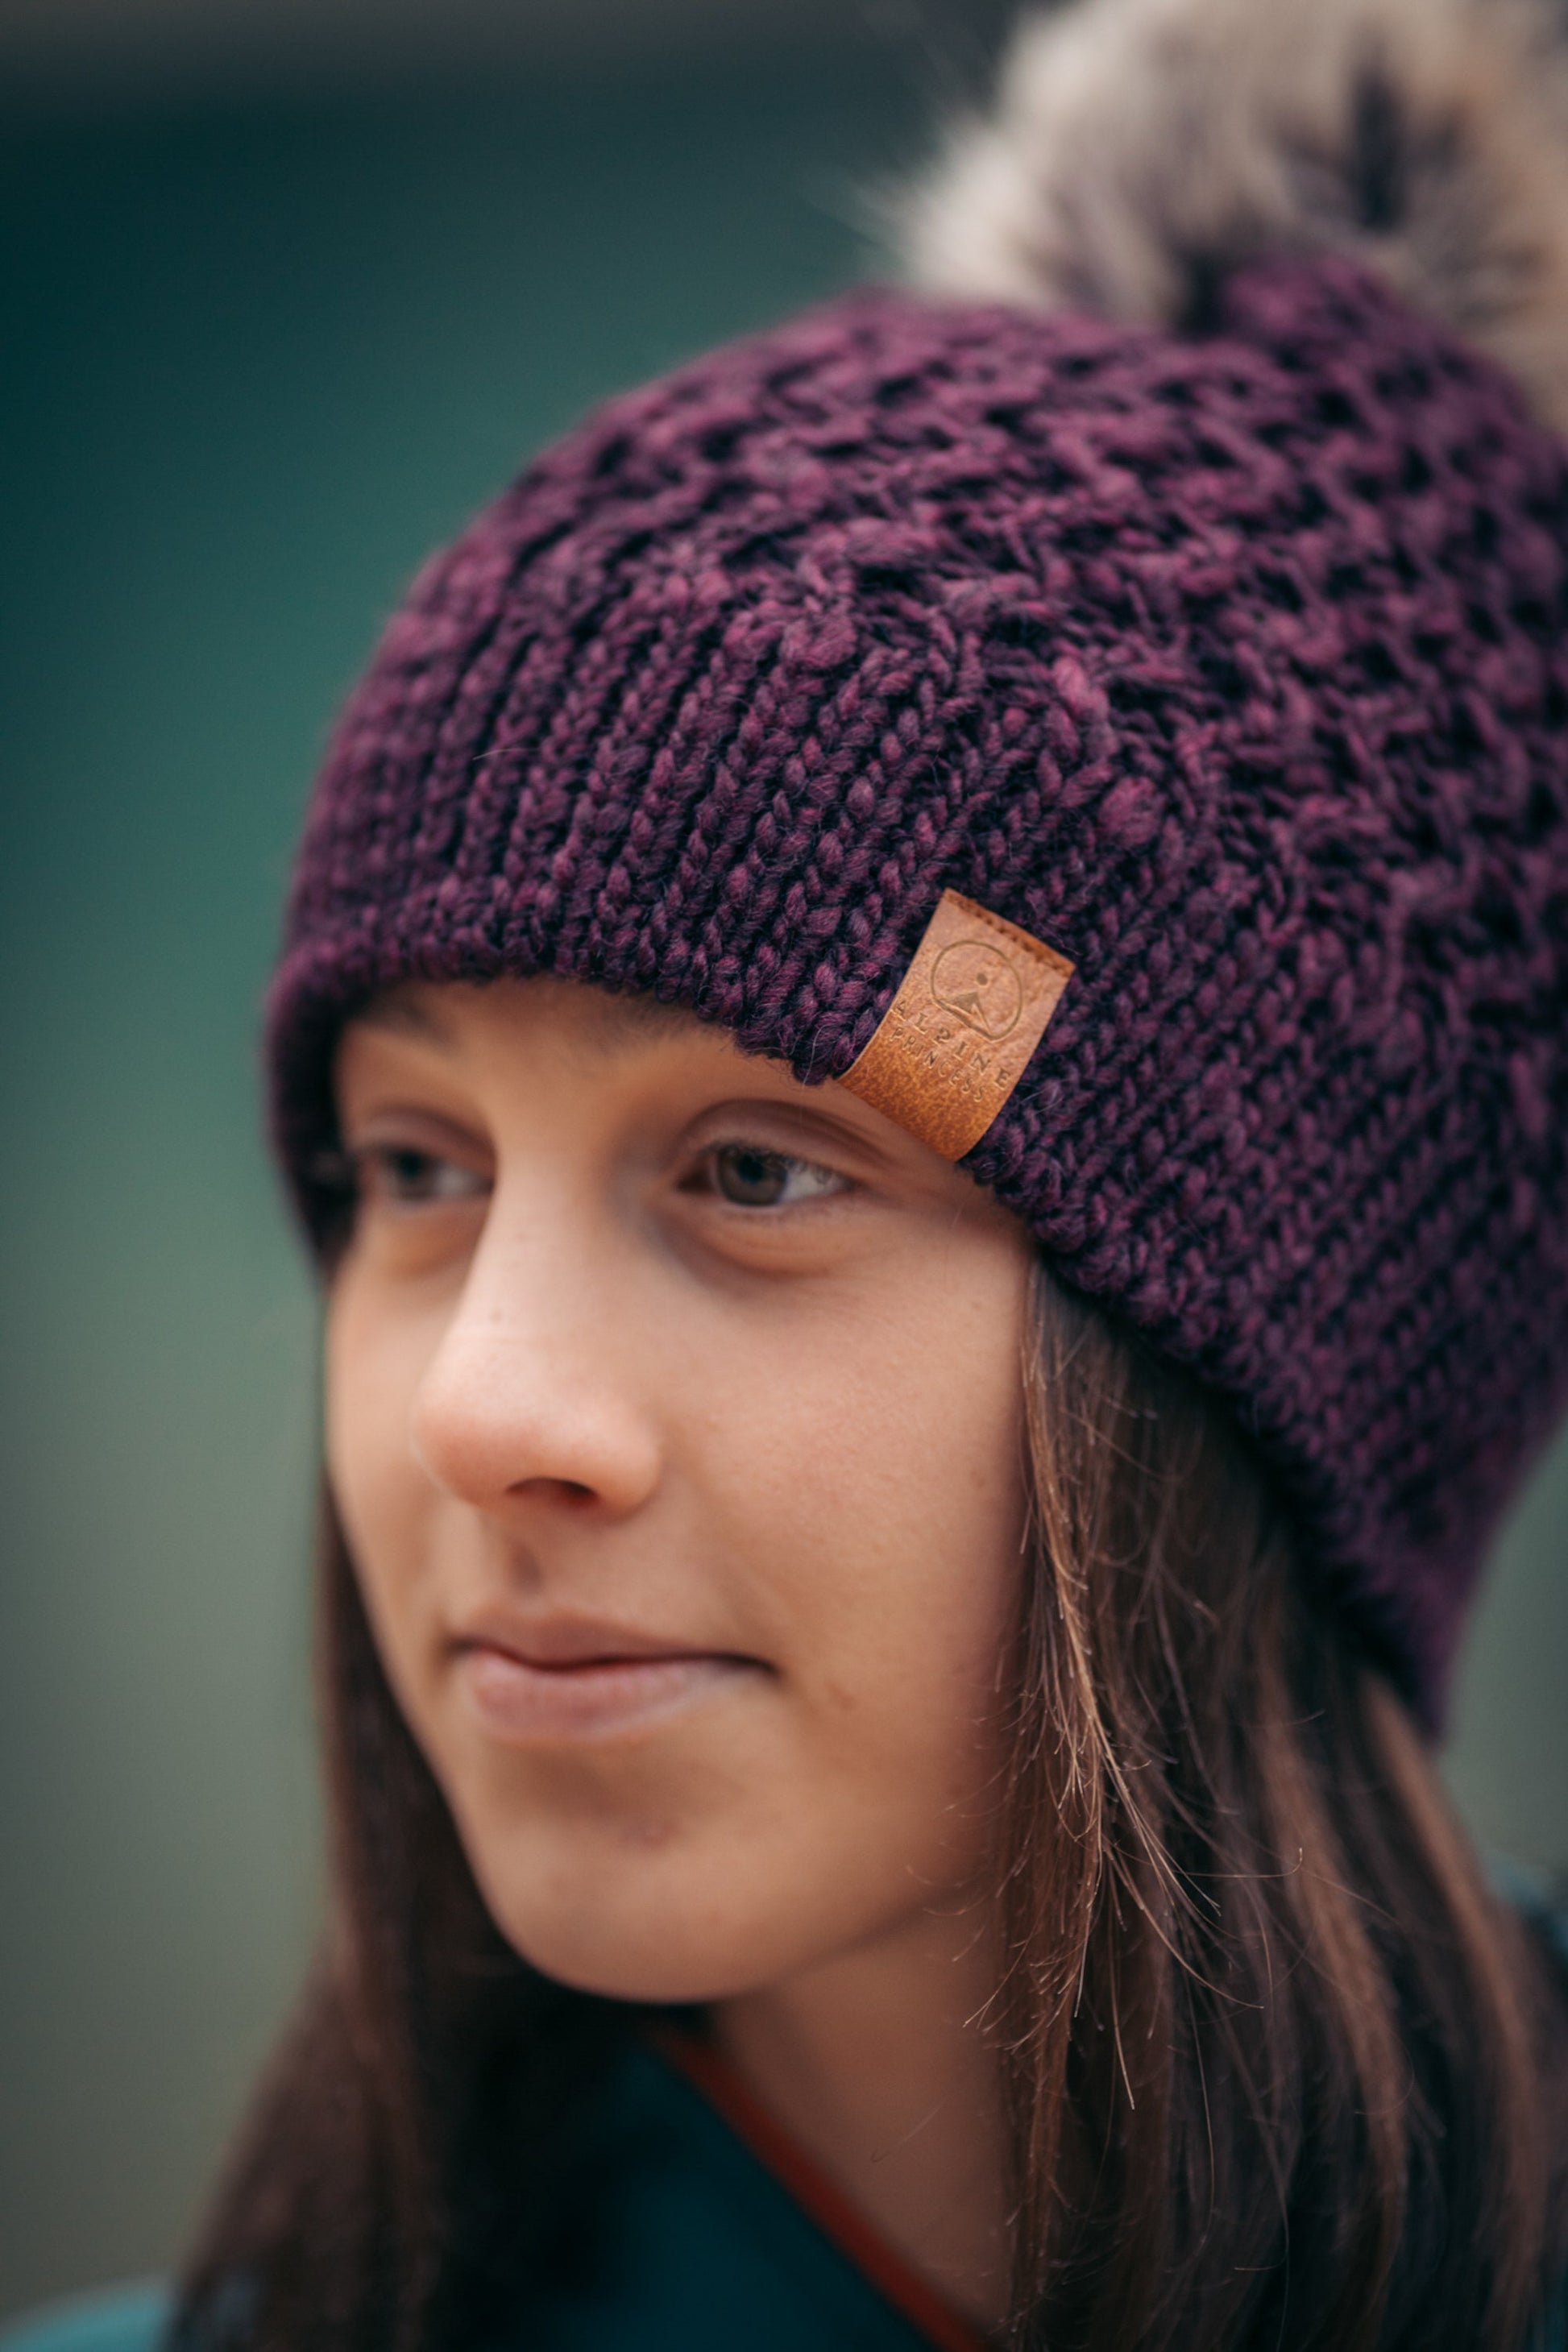 Alpine Princess Ruby Red Knitted Beanie made from wool lined with fleece for winter hiking